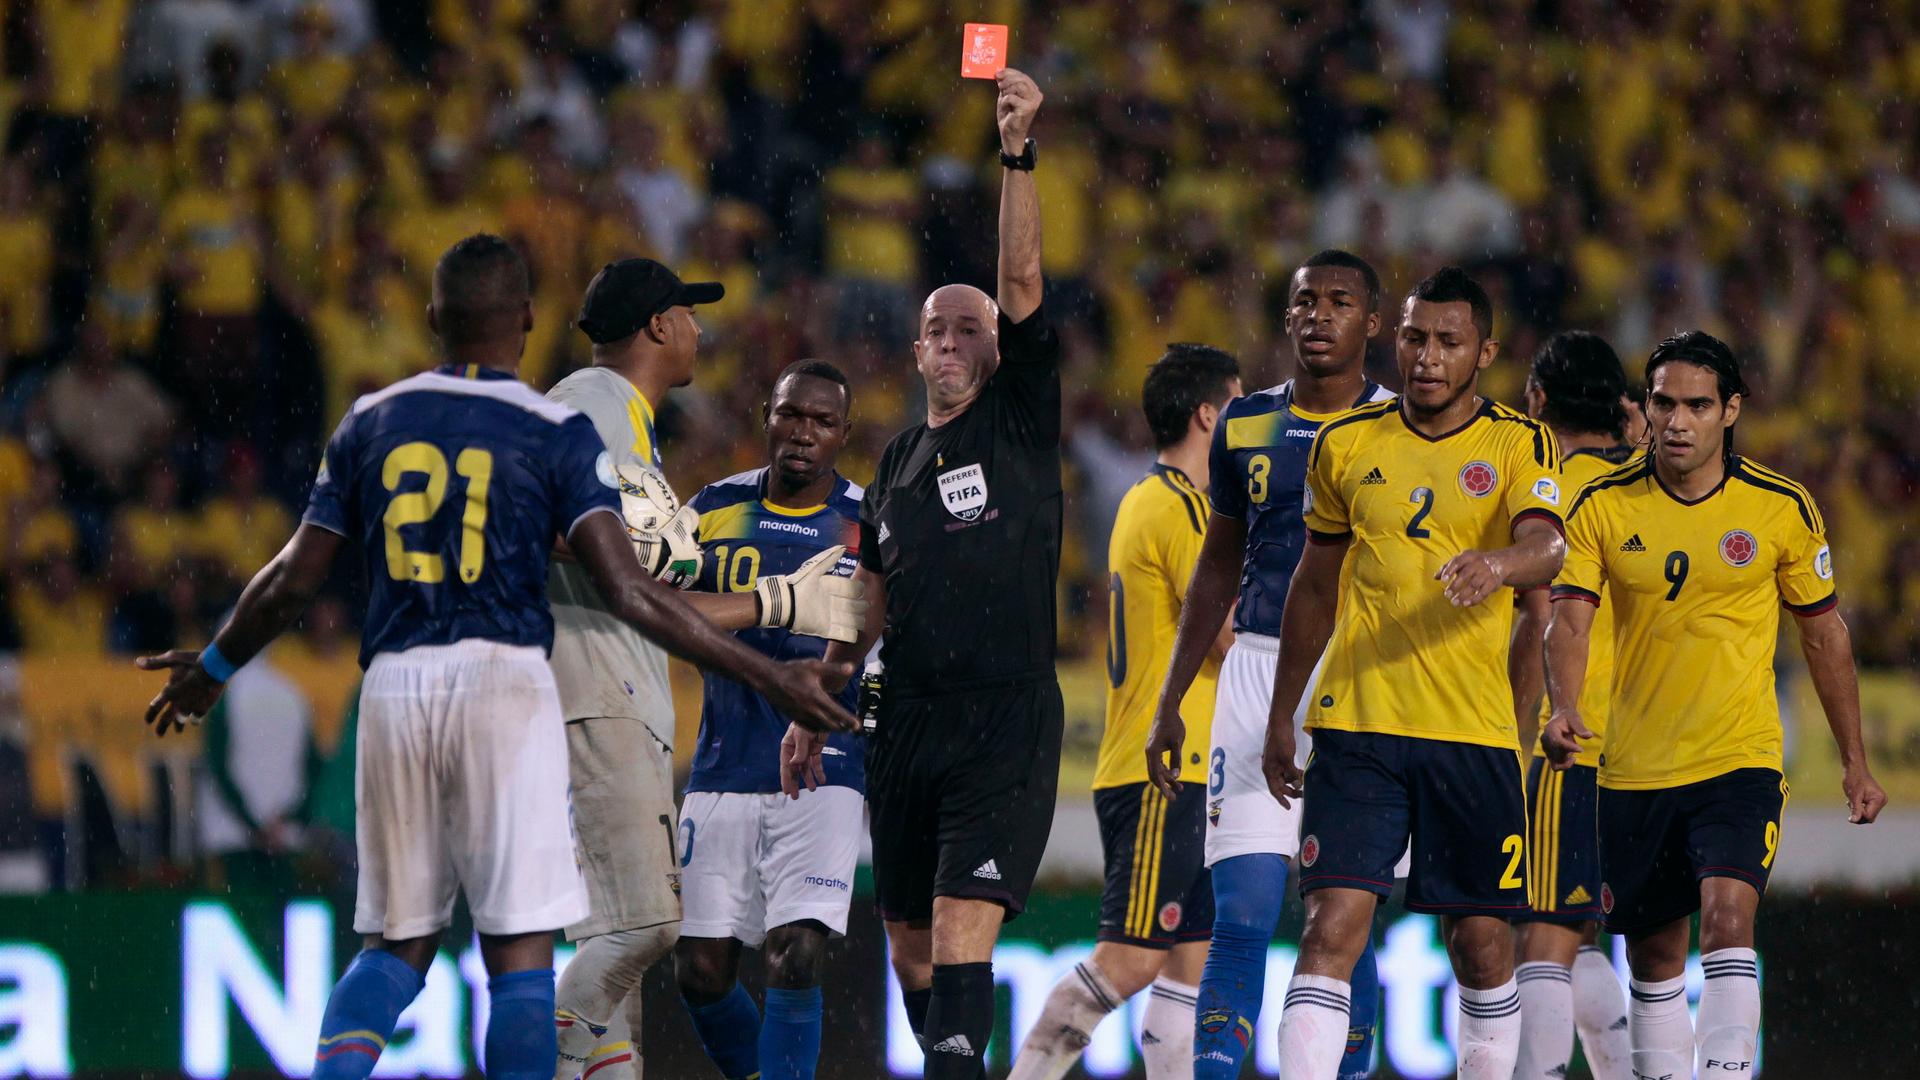 FIFA referee shows a red card during a 2014 World Cup qualifying match between Ecuador and Colombia